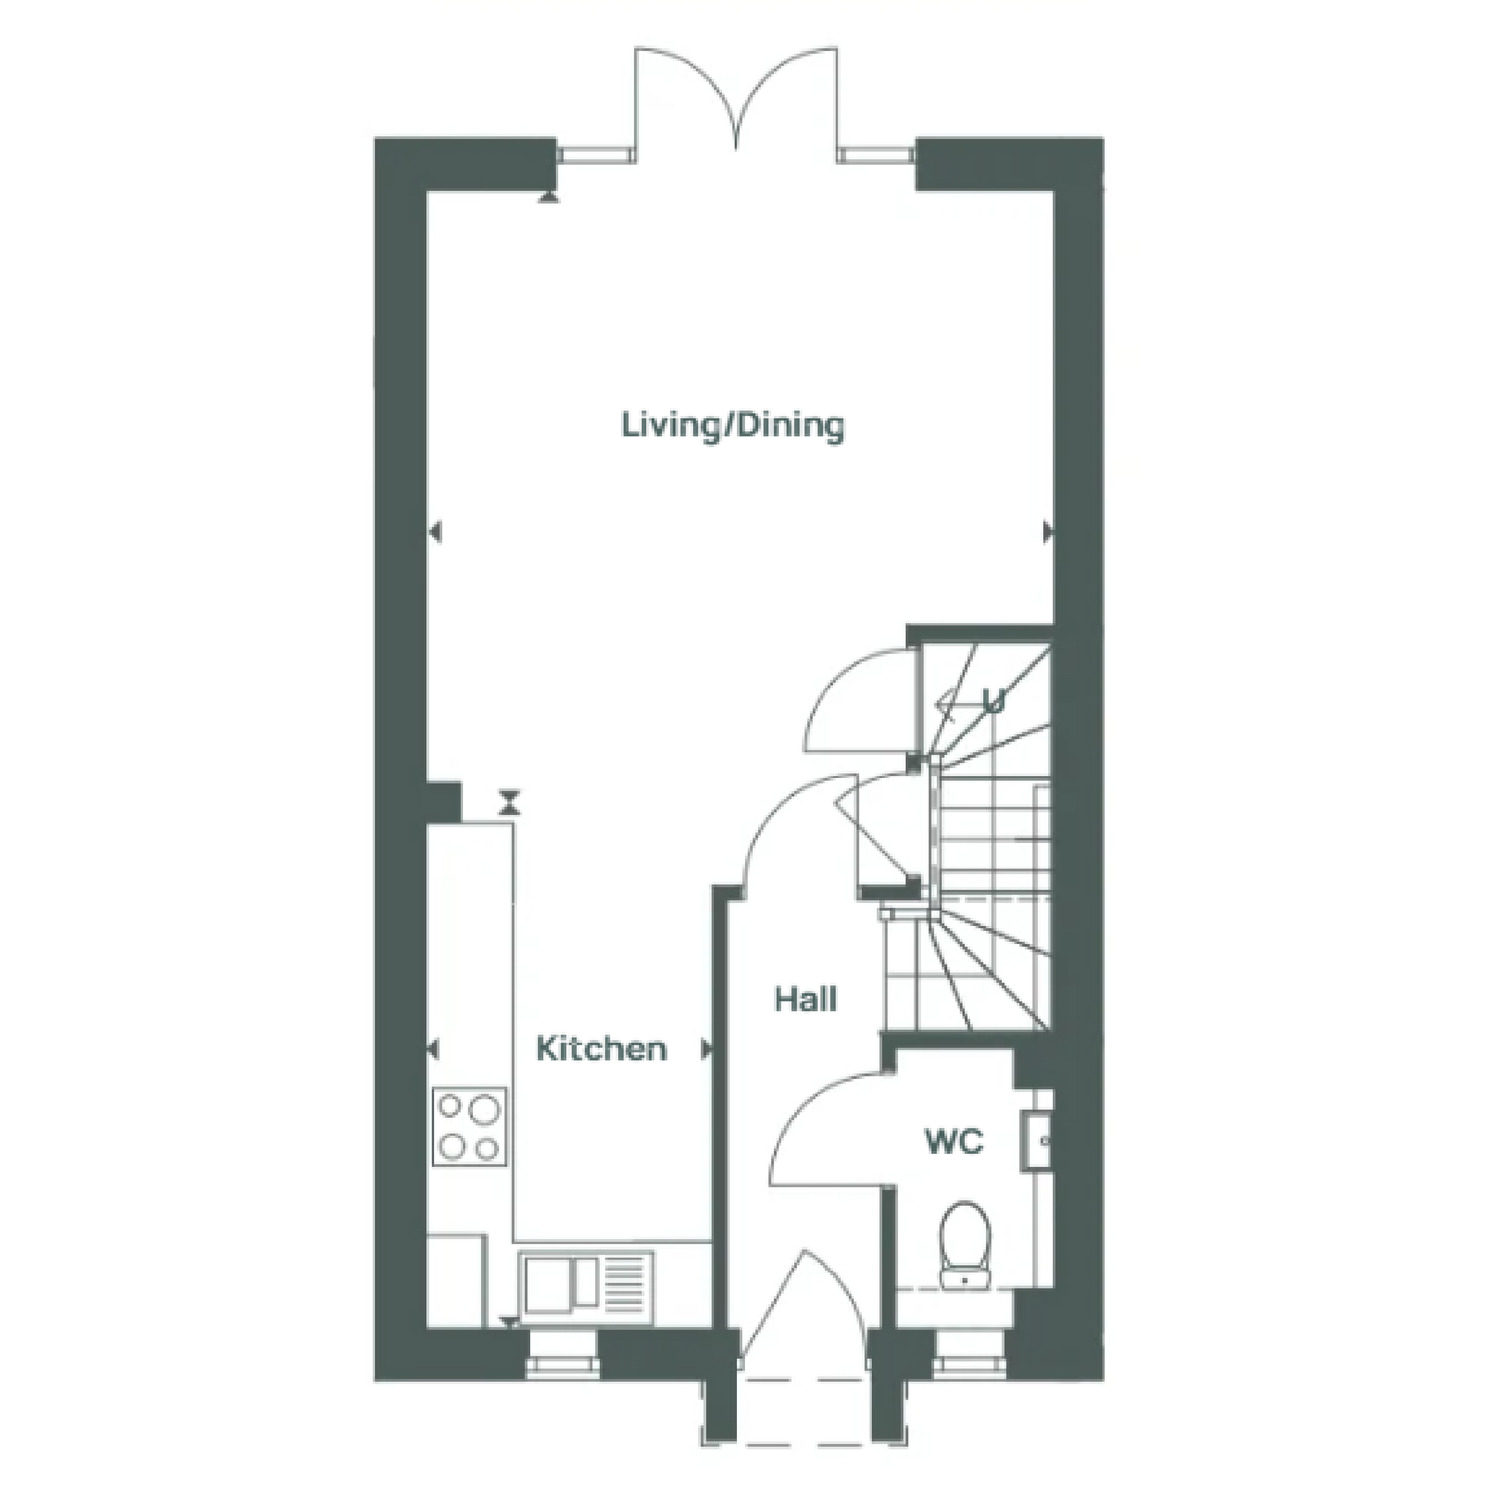 Coopers Hill 2 bed house variation plot 5,6 ground floor-01